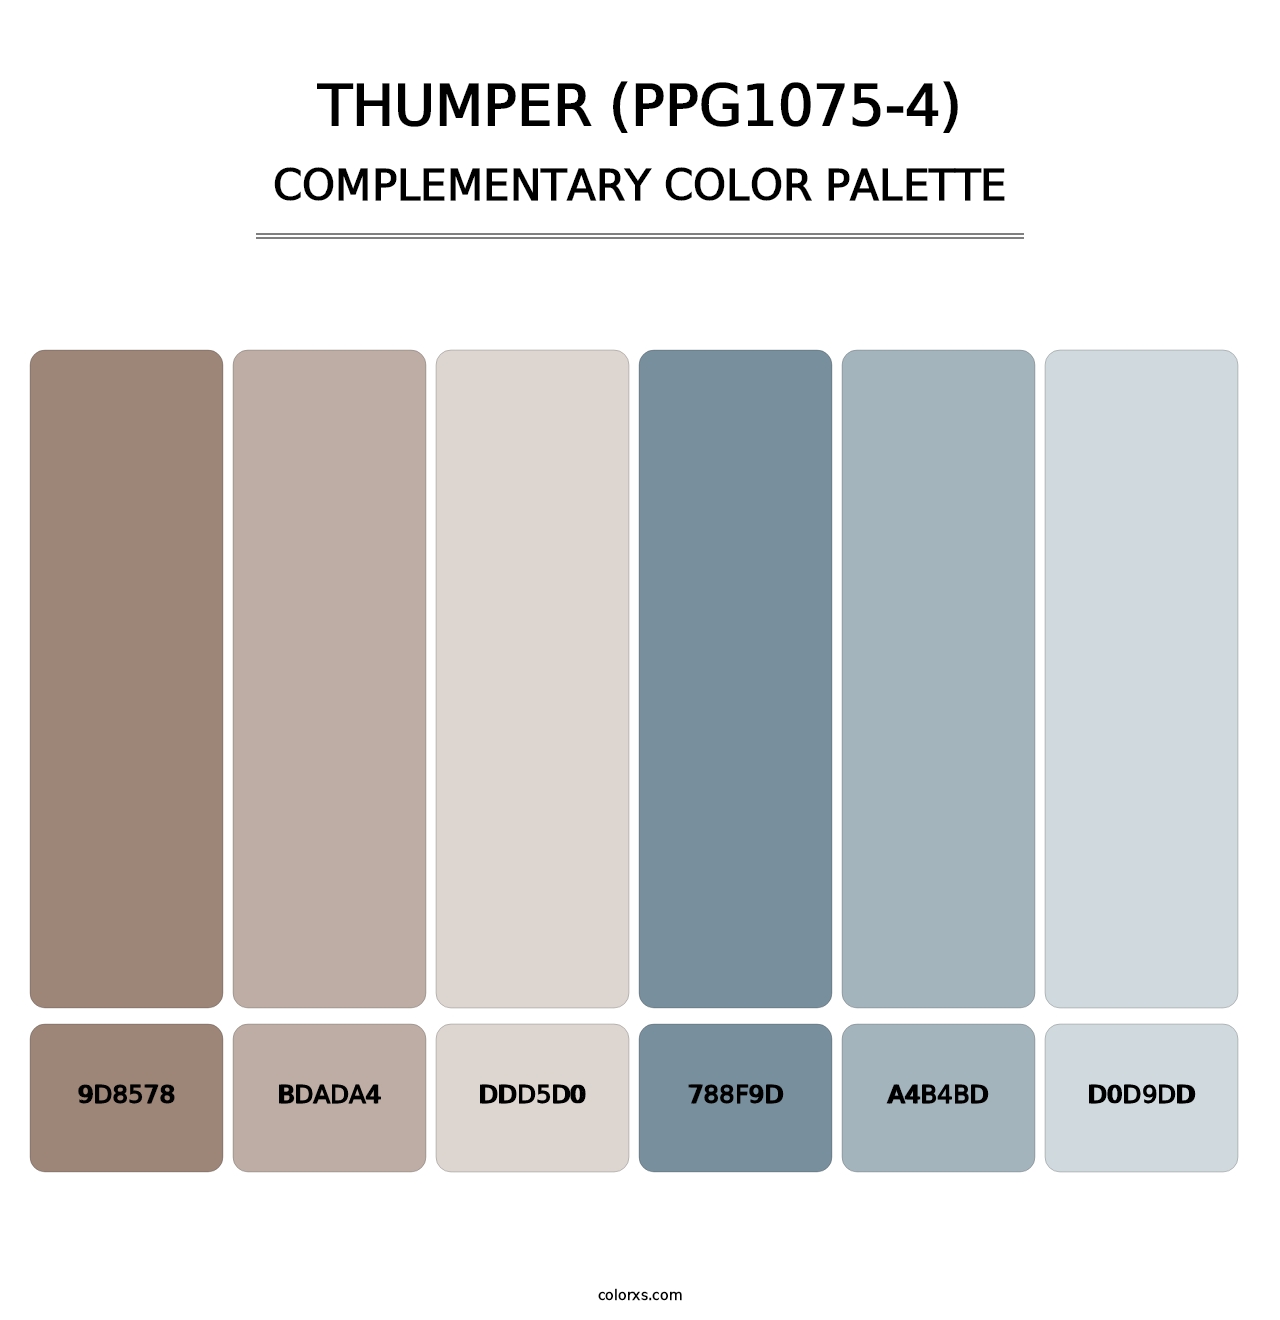 Thumper (PPG1075-4) - Complementary Color Palette